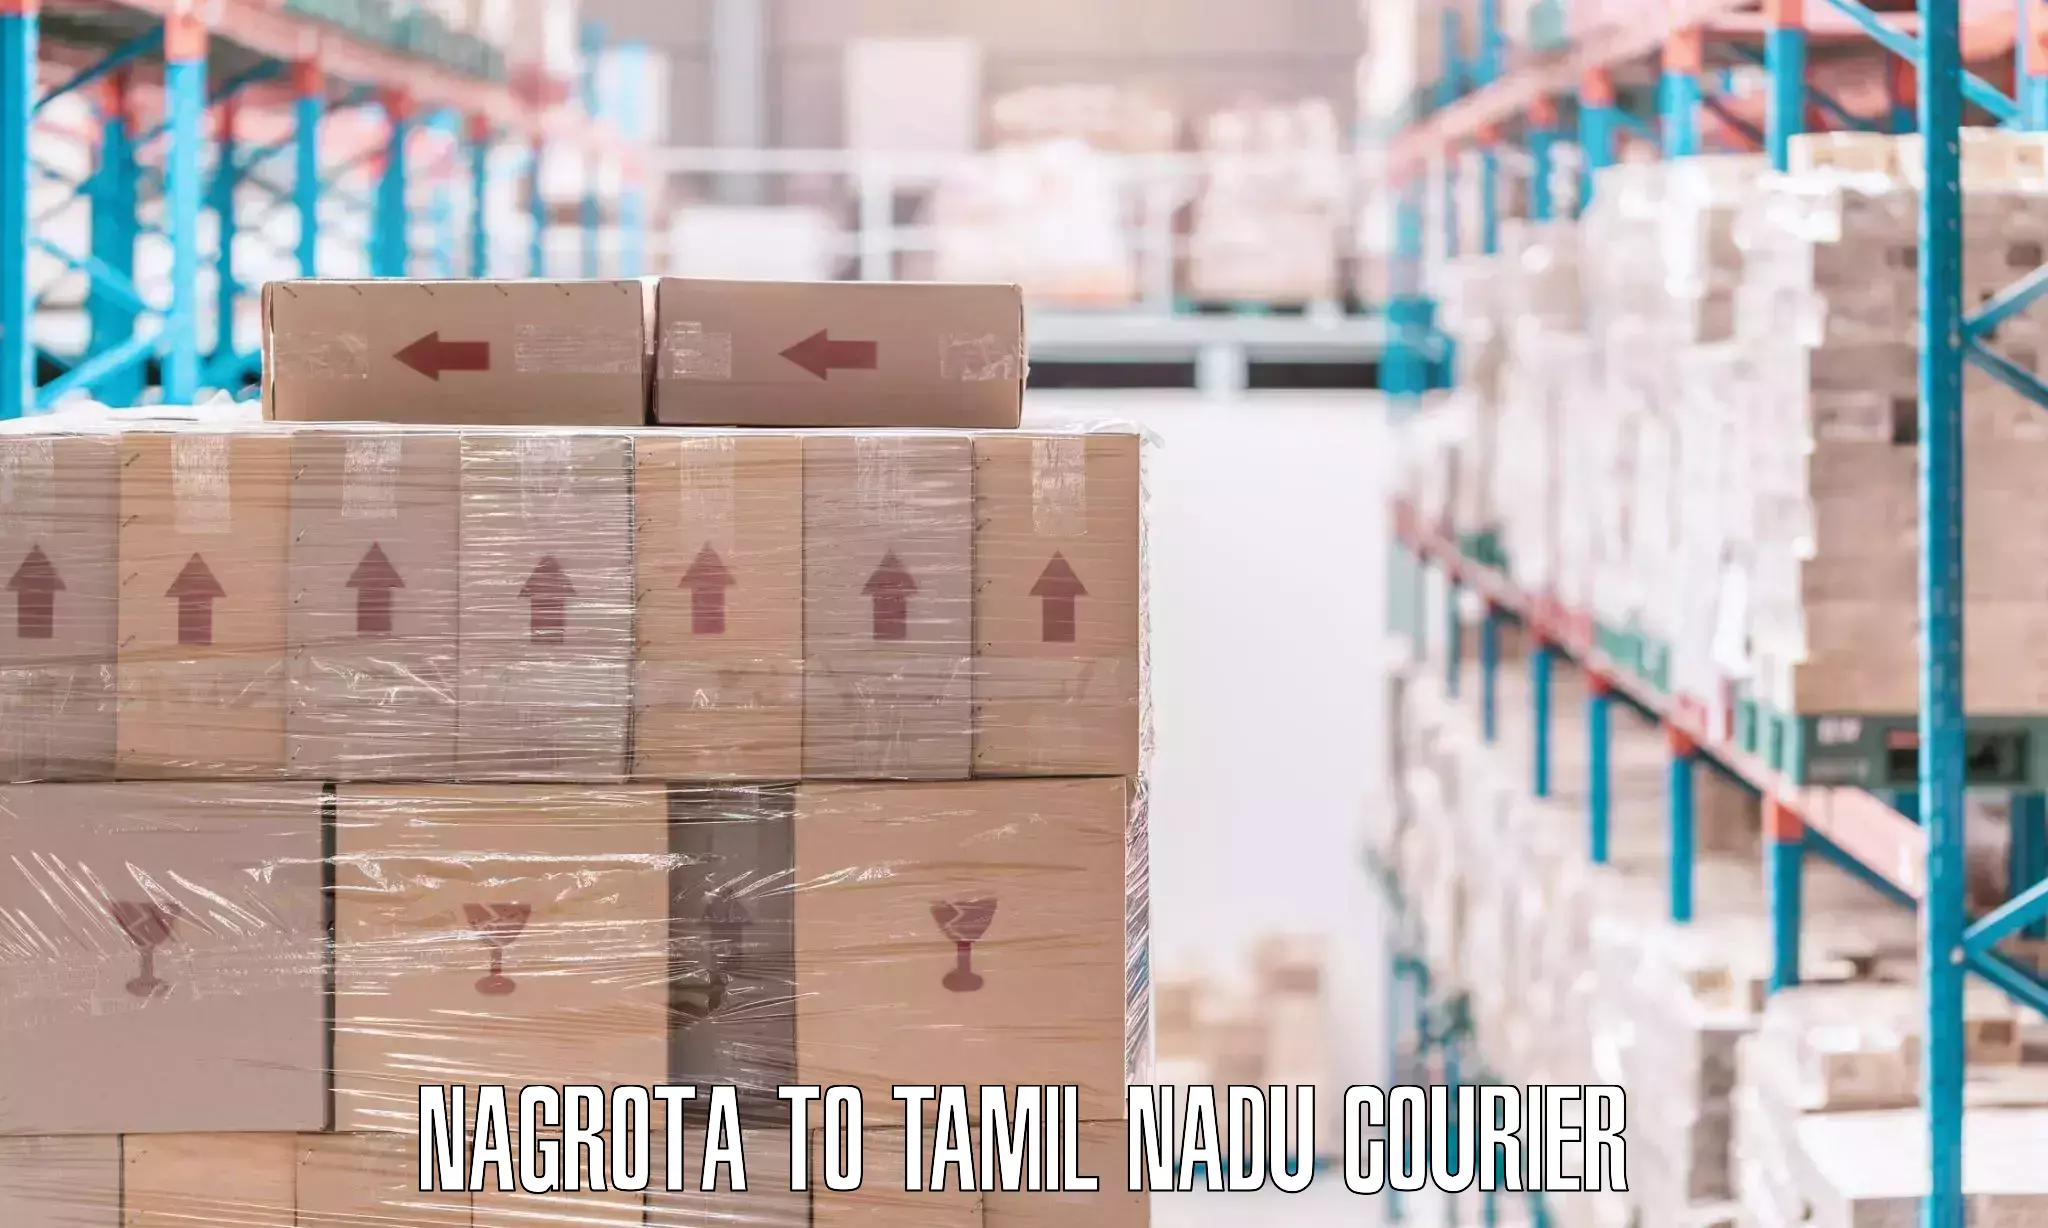 Trusted relocation experts Nagrota to Tamil Nadu